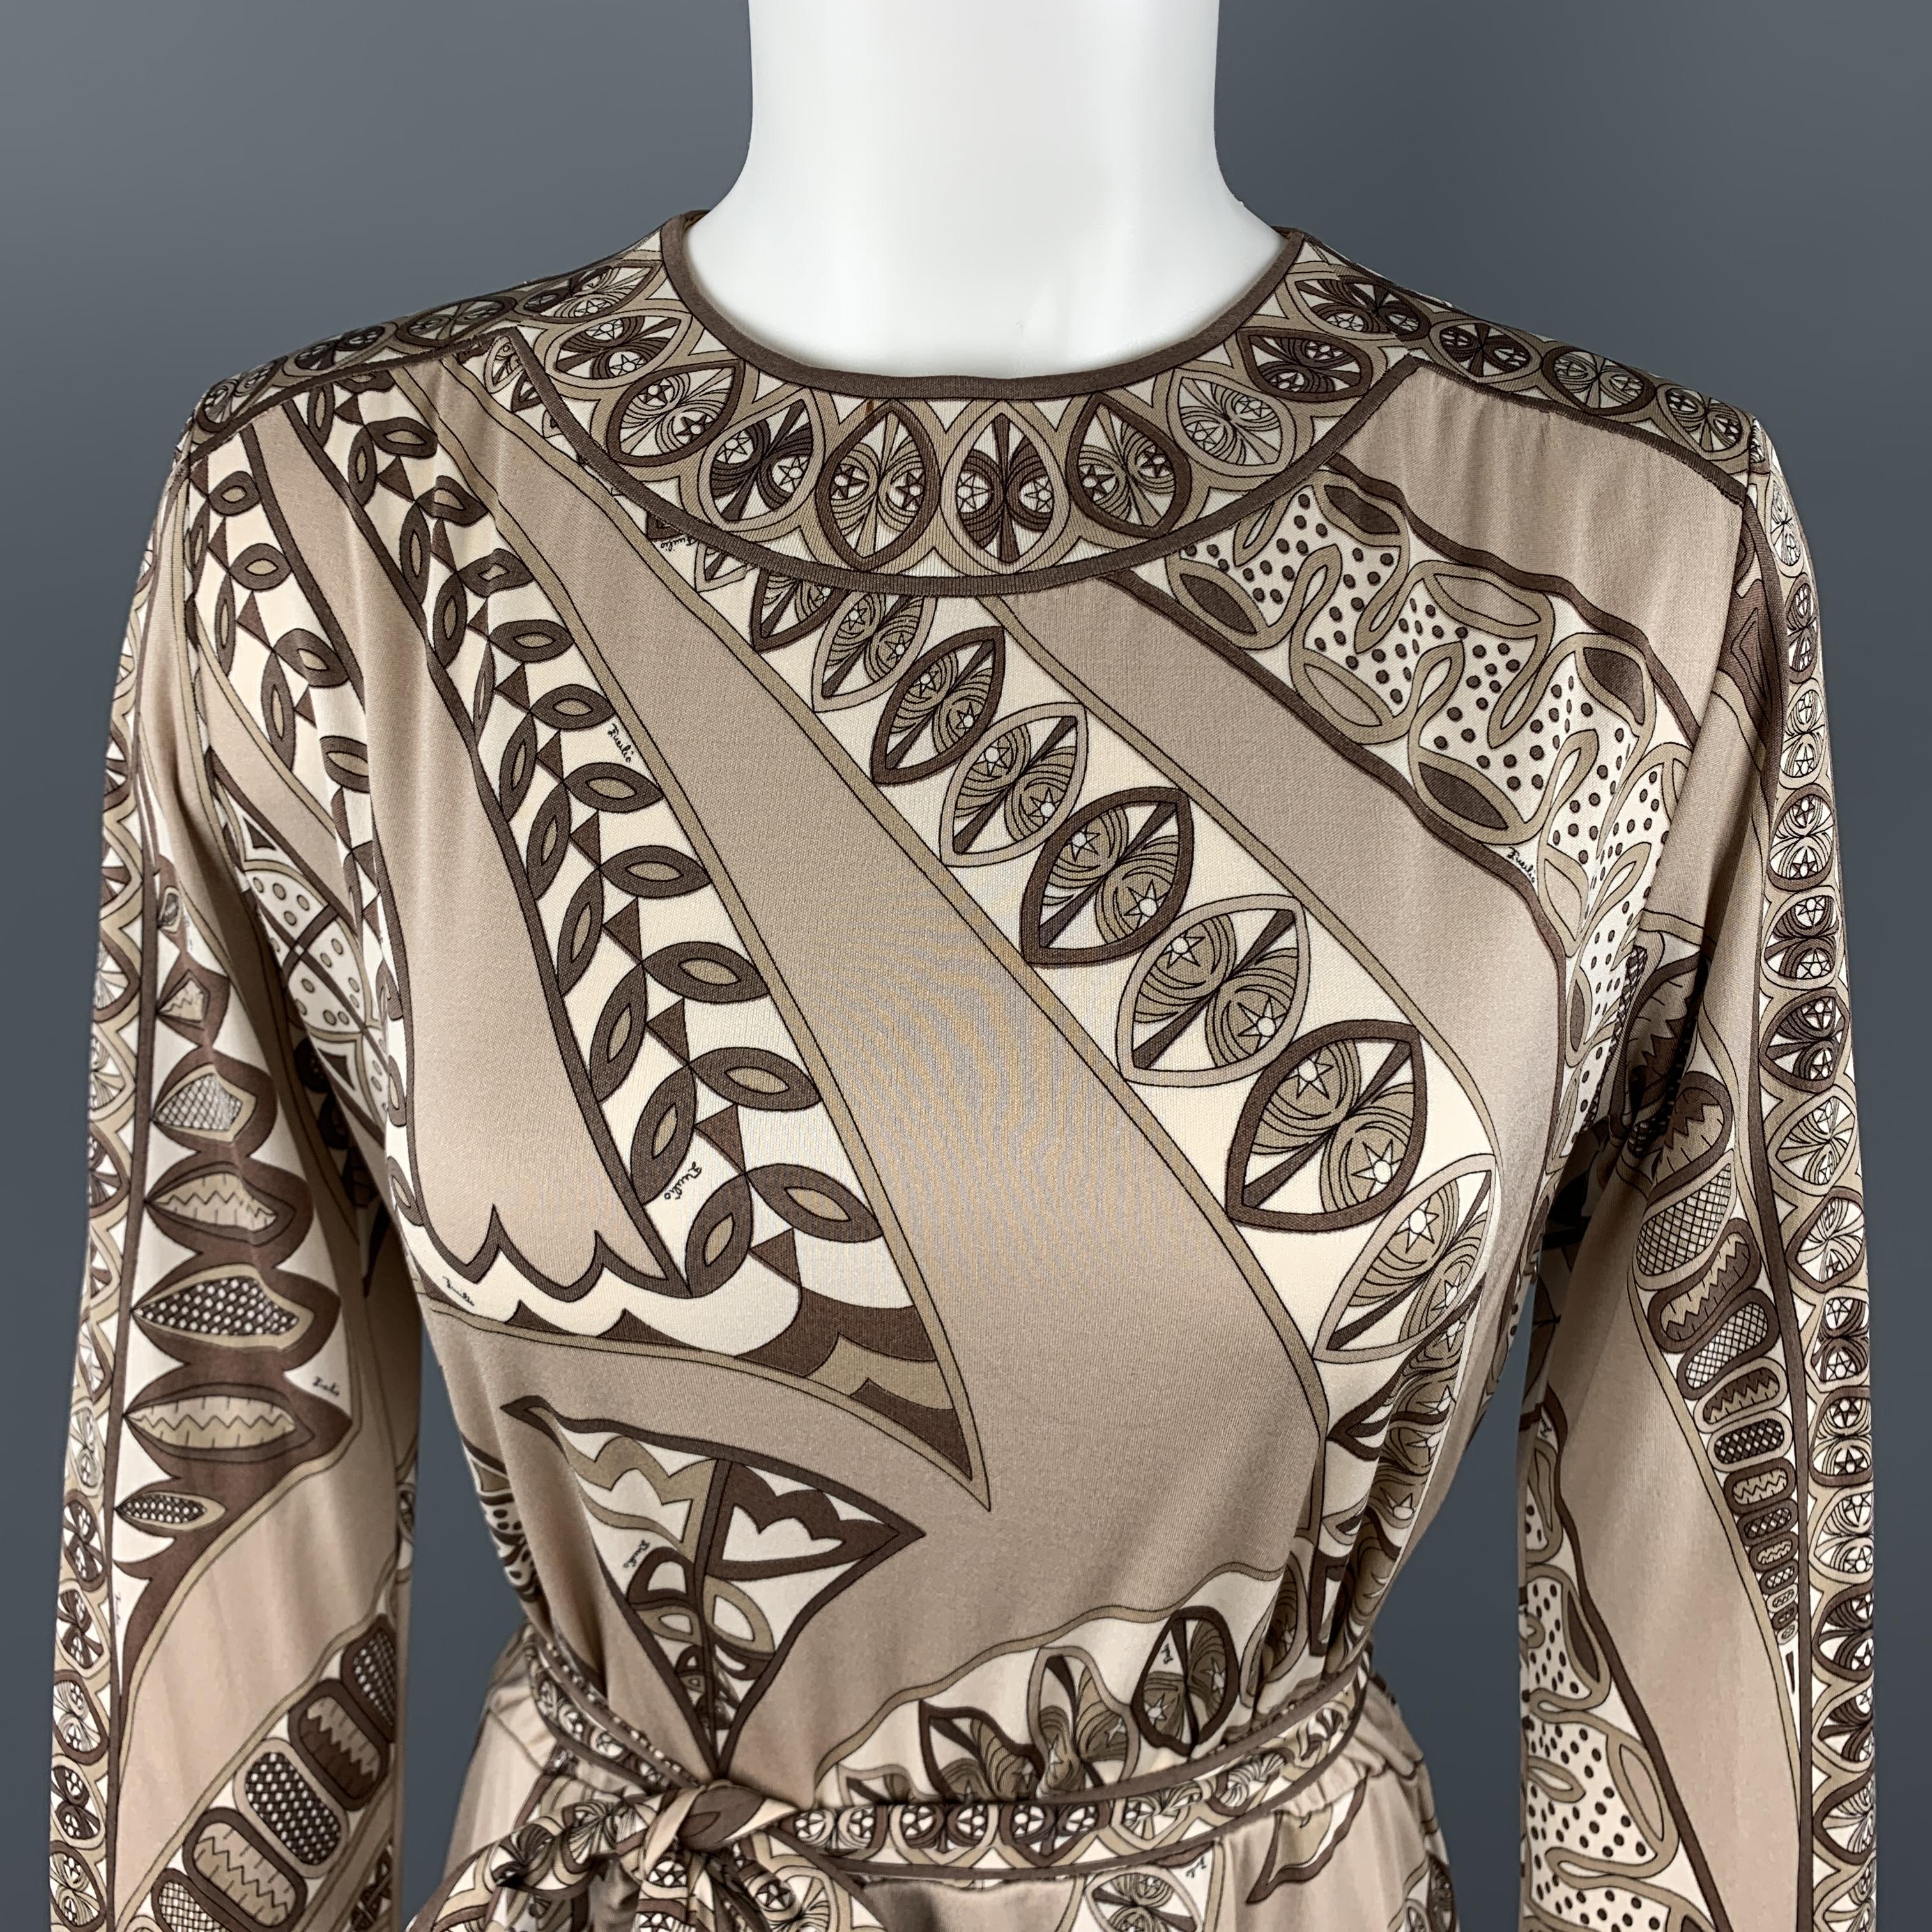 Vintage EMILIO PUCCI shift dress comes in taupe print silk jersey with a round neckline, tied belt waist, long blouse sleeves, and A line skirt. Wear and marks throughout. As-is. Made in Italy.

Fair Pre-Owned Condition.
Marked: